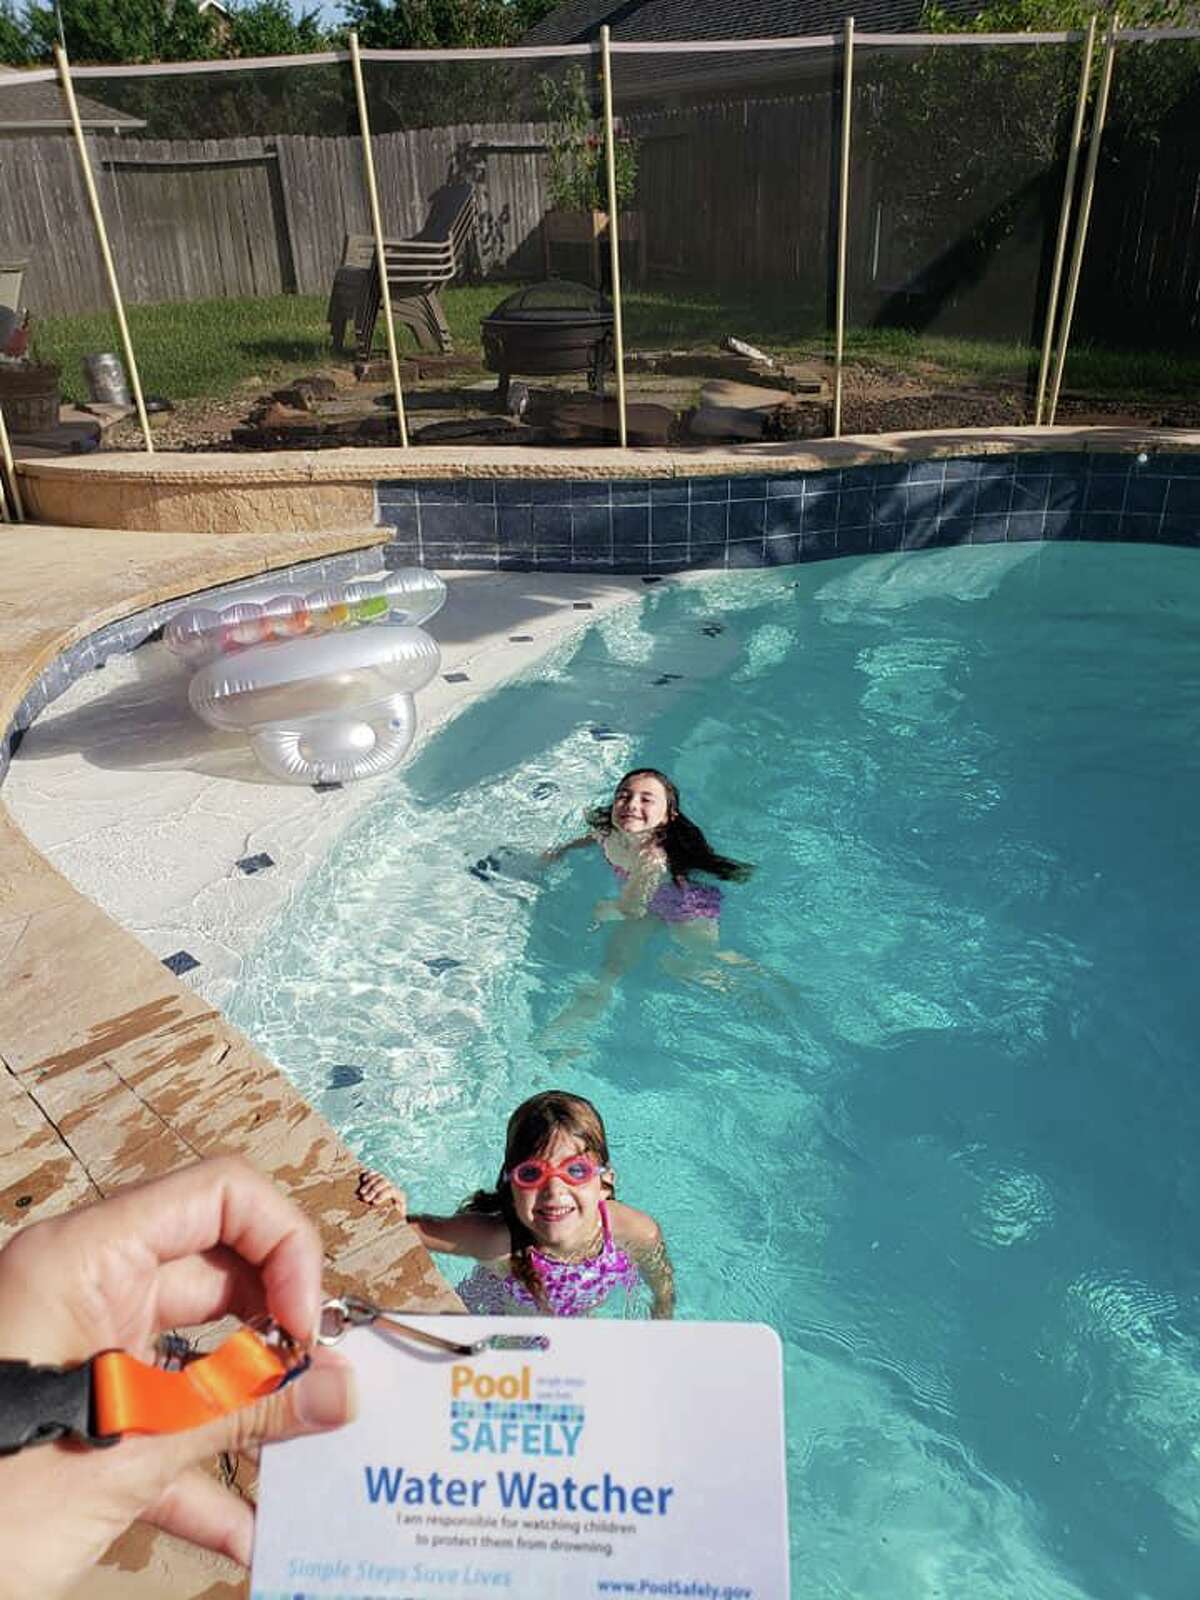 Jenny Bennett, a nurse at HCA Tomball, lost her toddler son to a home pool drowning accident. She now advocates for childhood drowning prevention awareness, and helped found Parents Preventing Childhood Drowning.